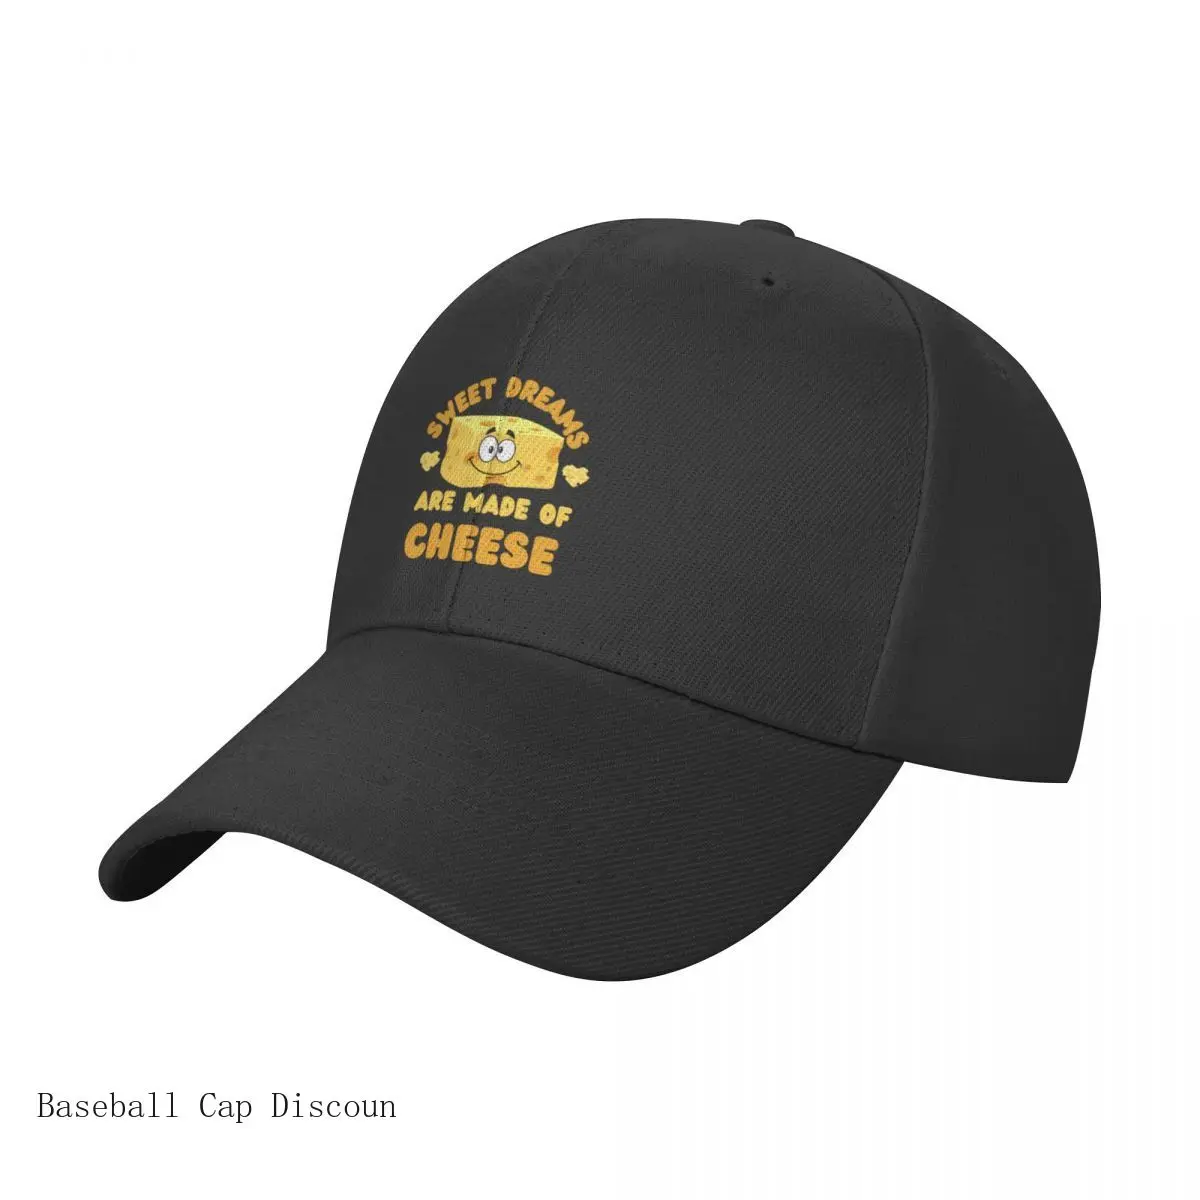 

Sweet Dreams are made of cheese kawaii - A funny gift for cheese lovers Cap Baseball Cap beach rave women's beach outlet Men's B